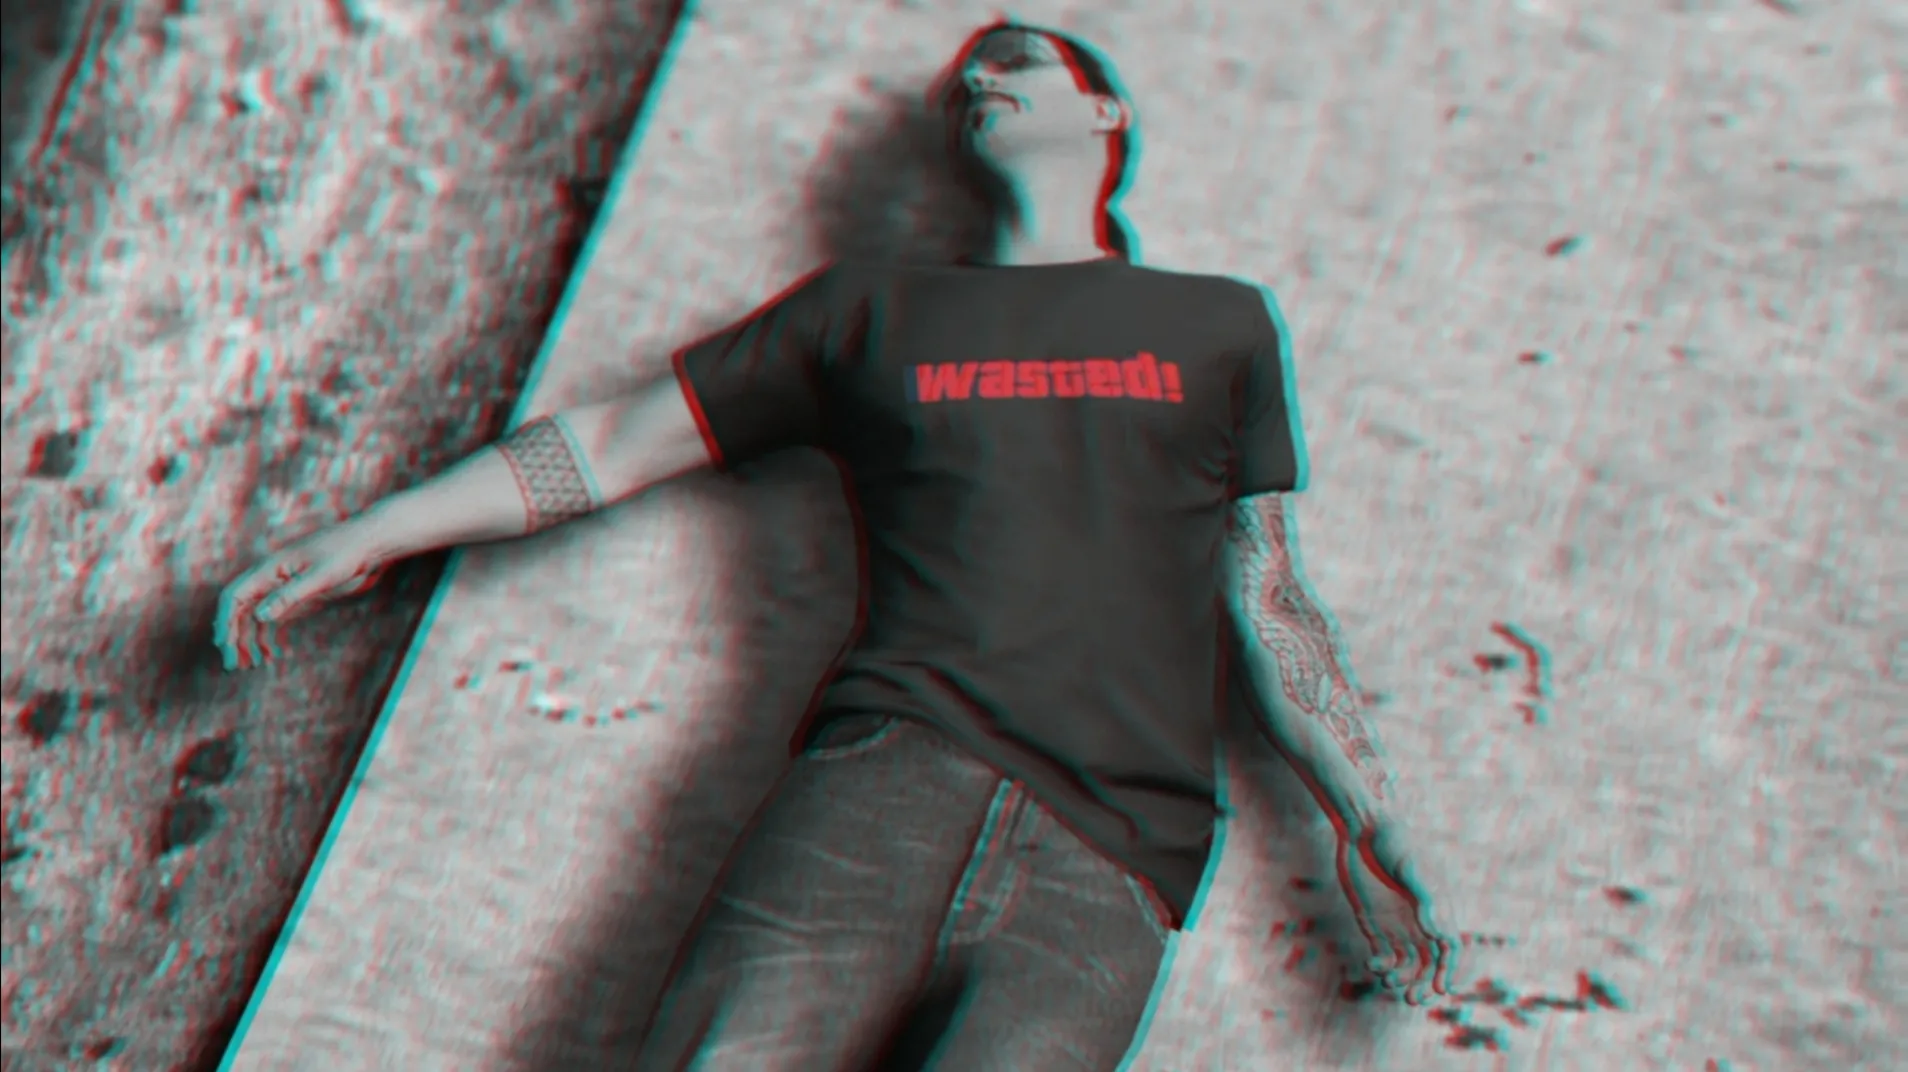 gta online wasted tee